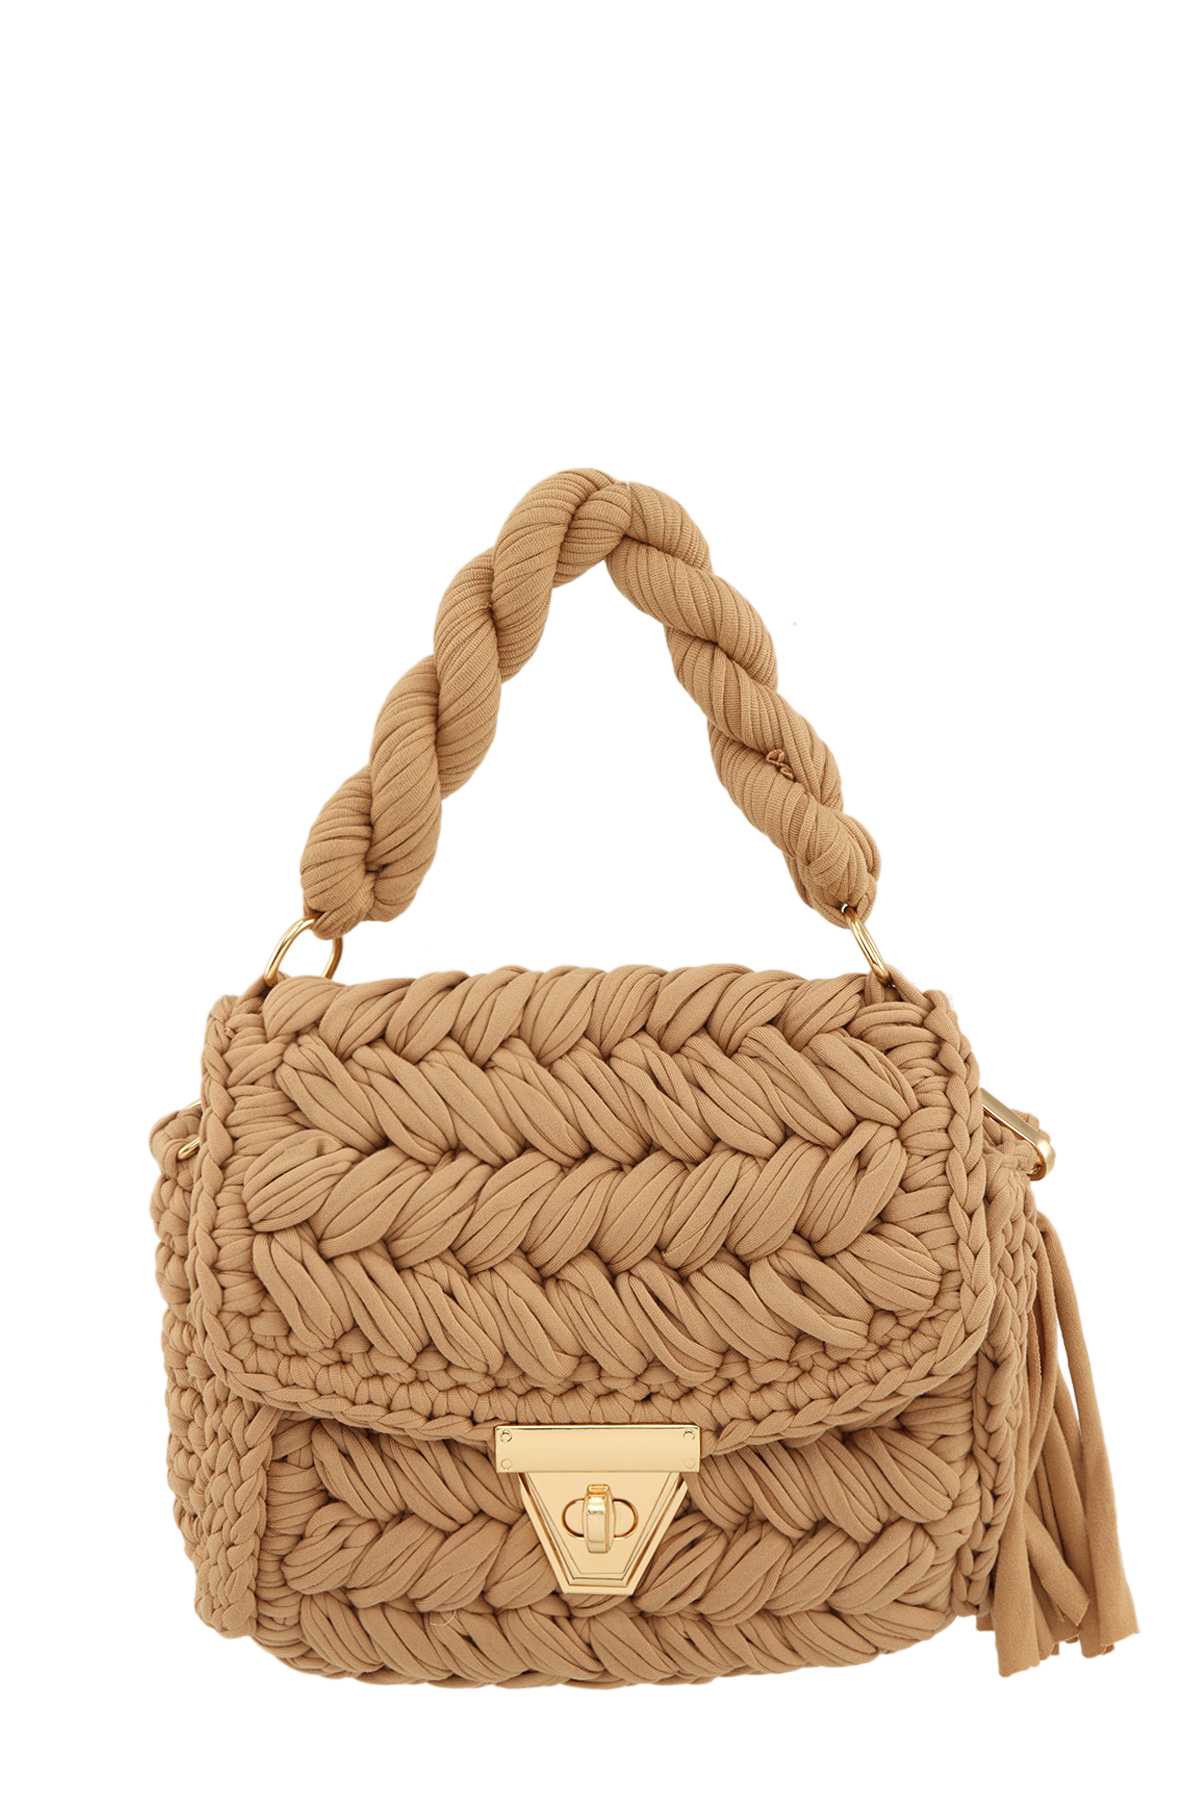 Woven Knitted Handbag with Tassel Charm